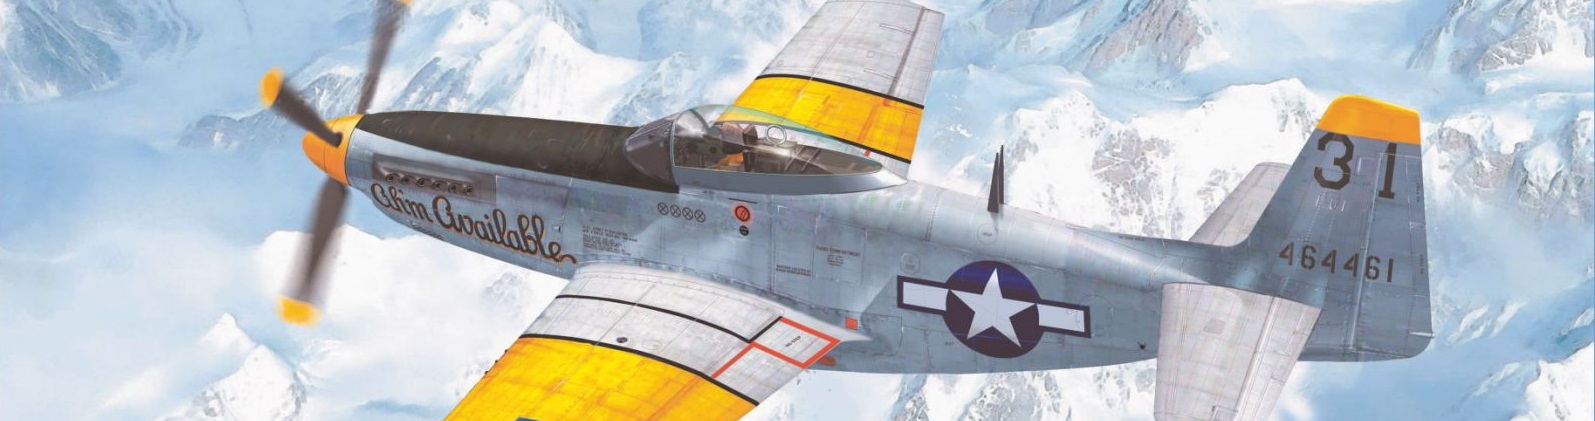 The new P-51H "Mustang" (1/48) is coming on 31st of March